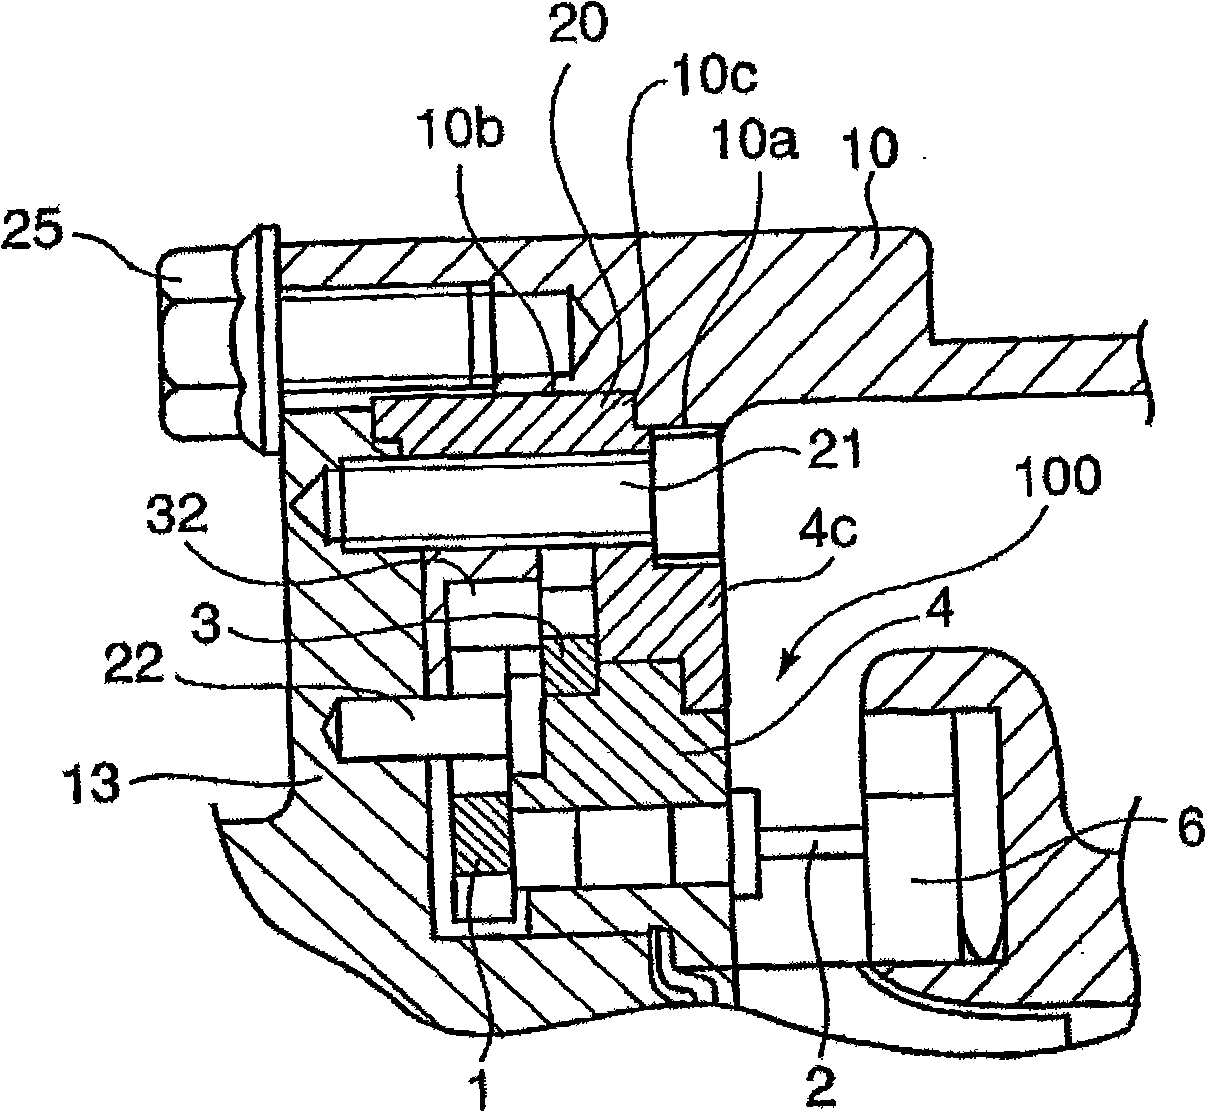 Mounting structure for variable nozzle mechanism